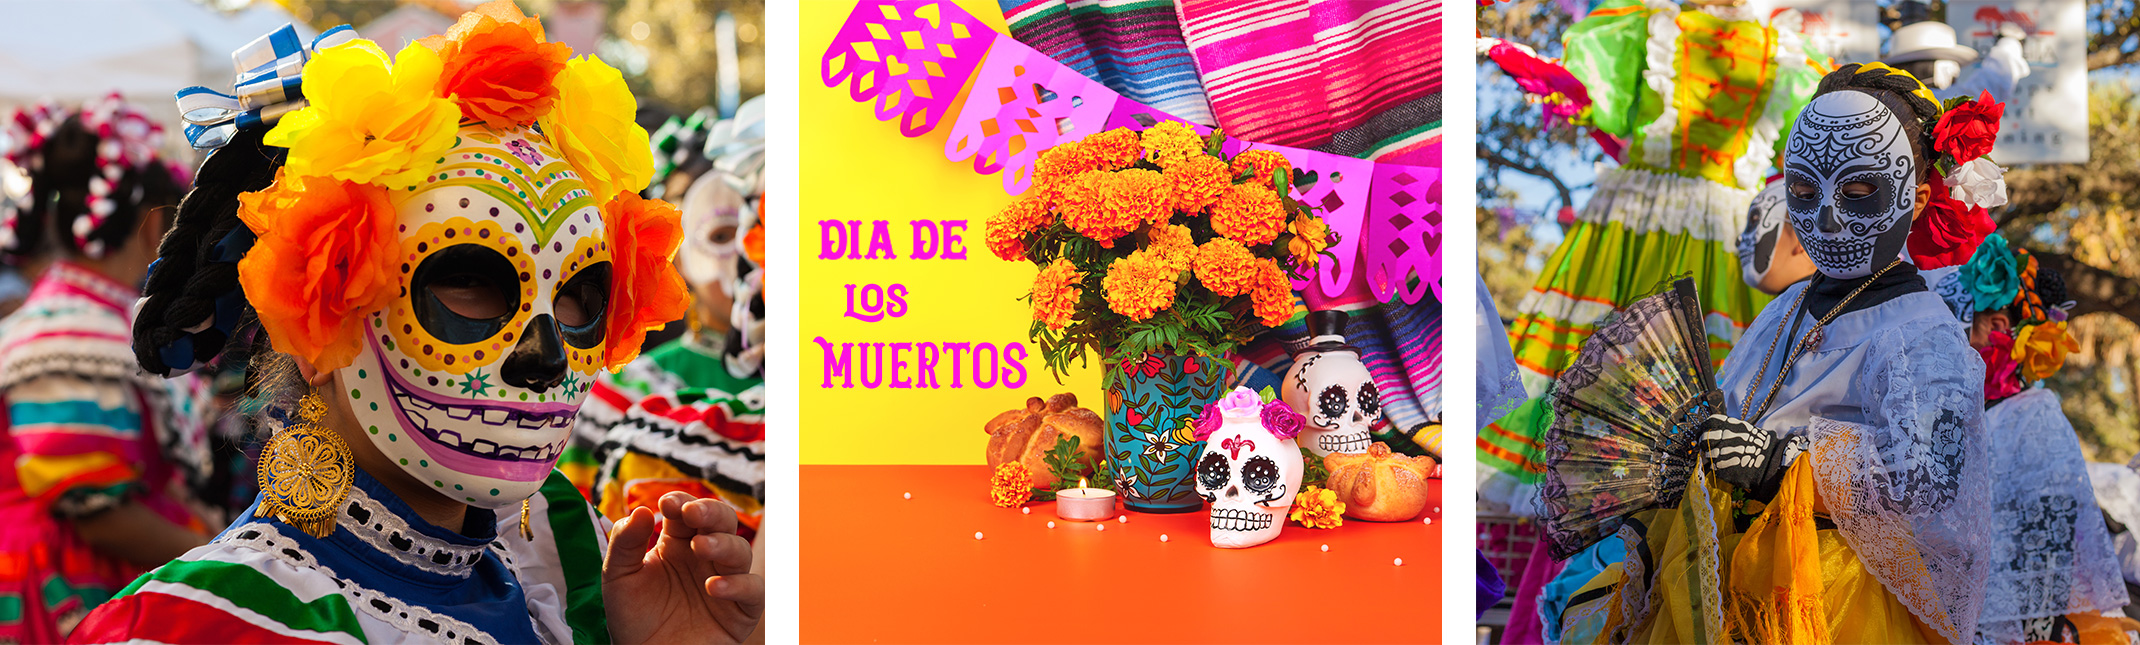 A woman, and a child dressed up for dia de los muertos, and traditional dia de los muertos decor (skulls, marigolds, flags, candles, blanket, and food.